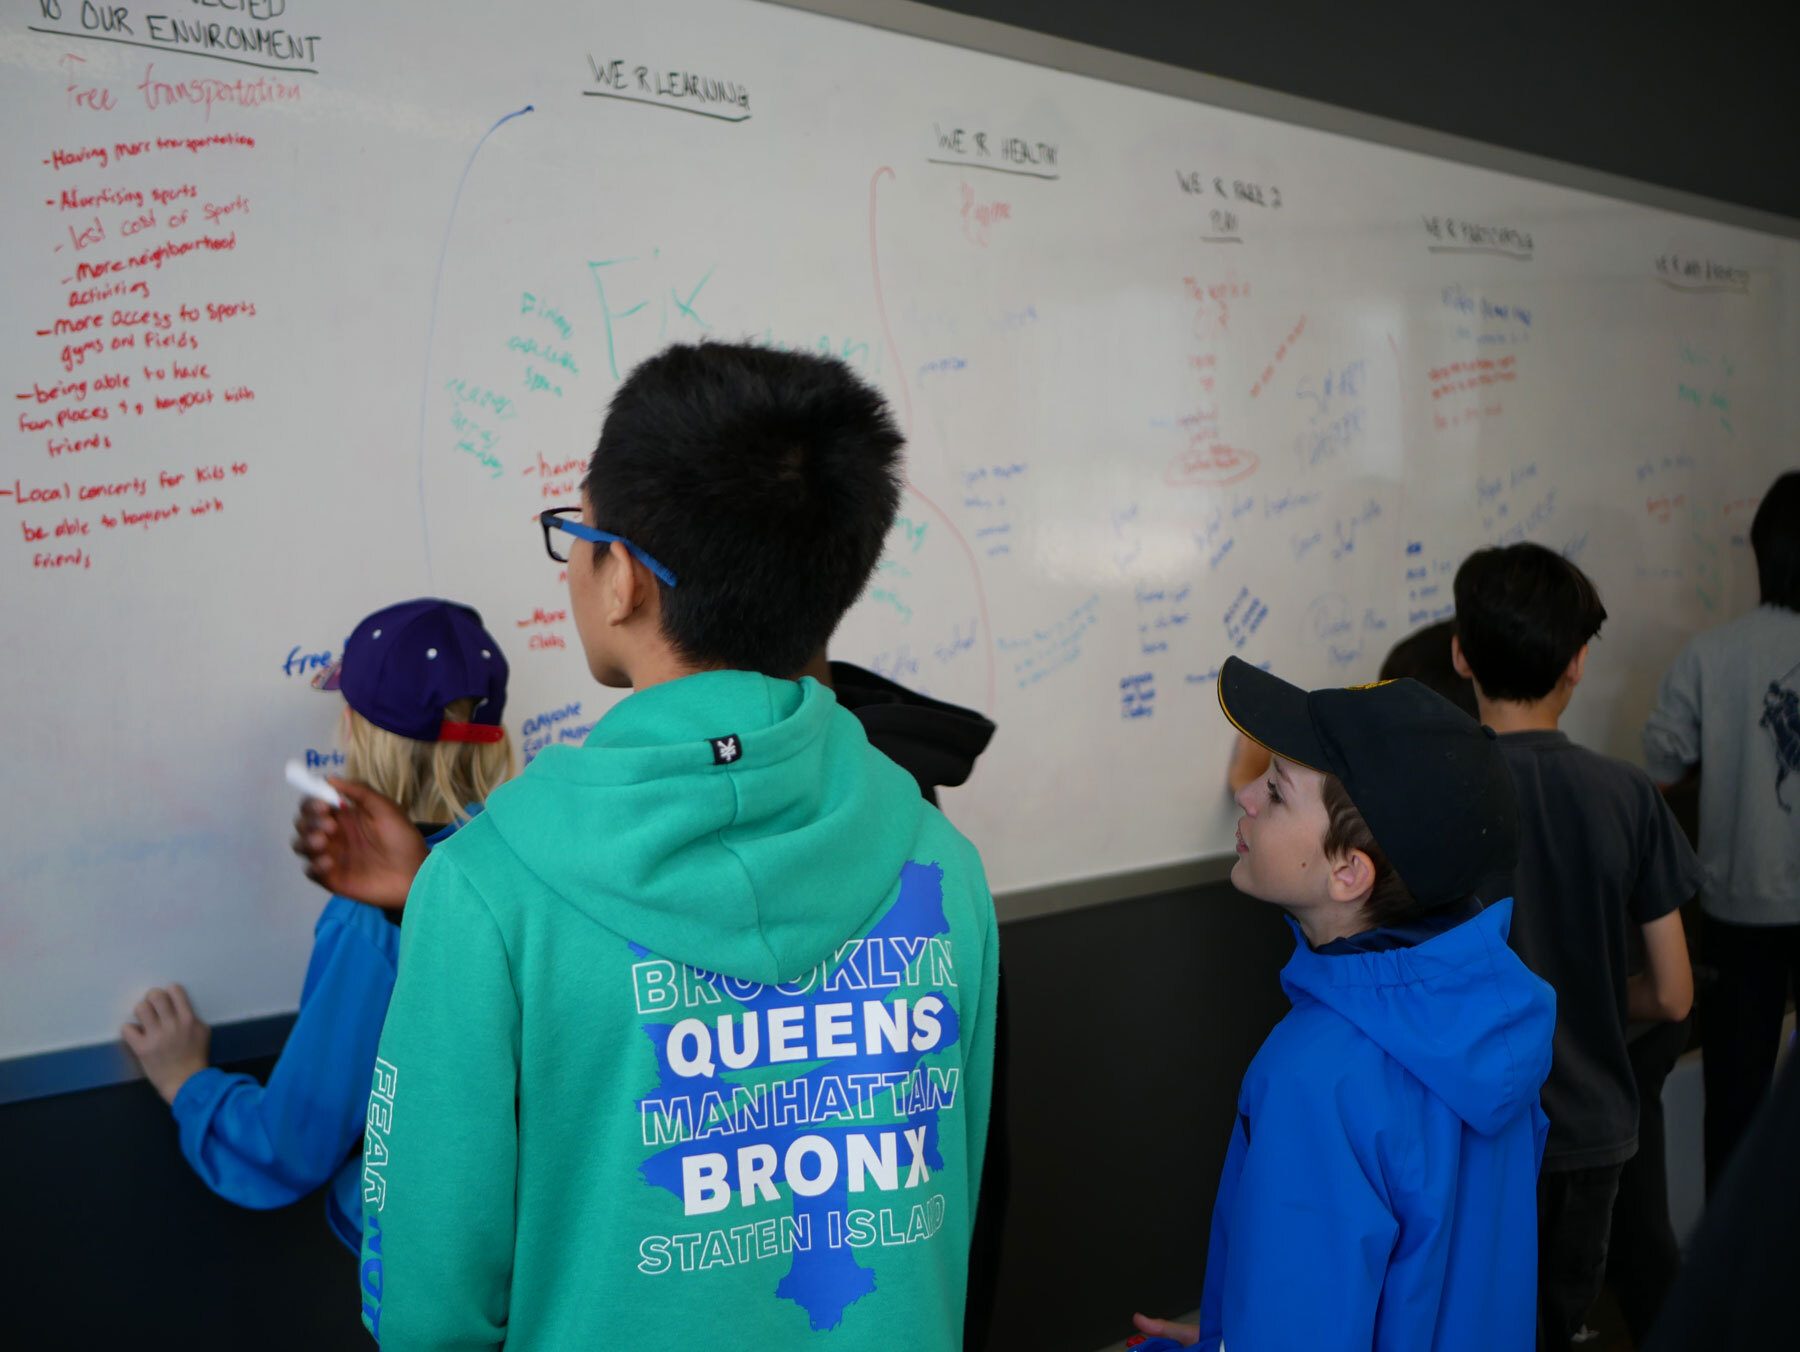 an image of youth looking at a whiteboard